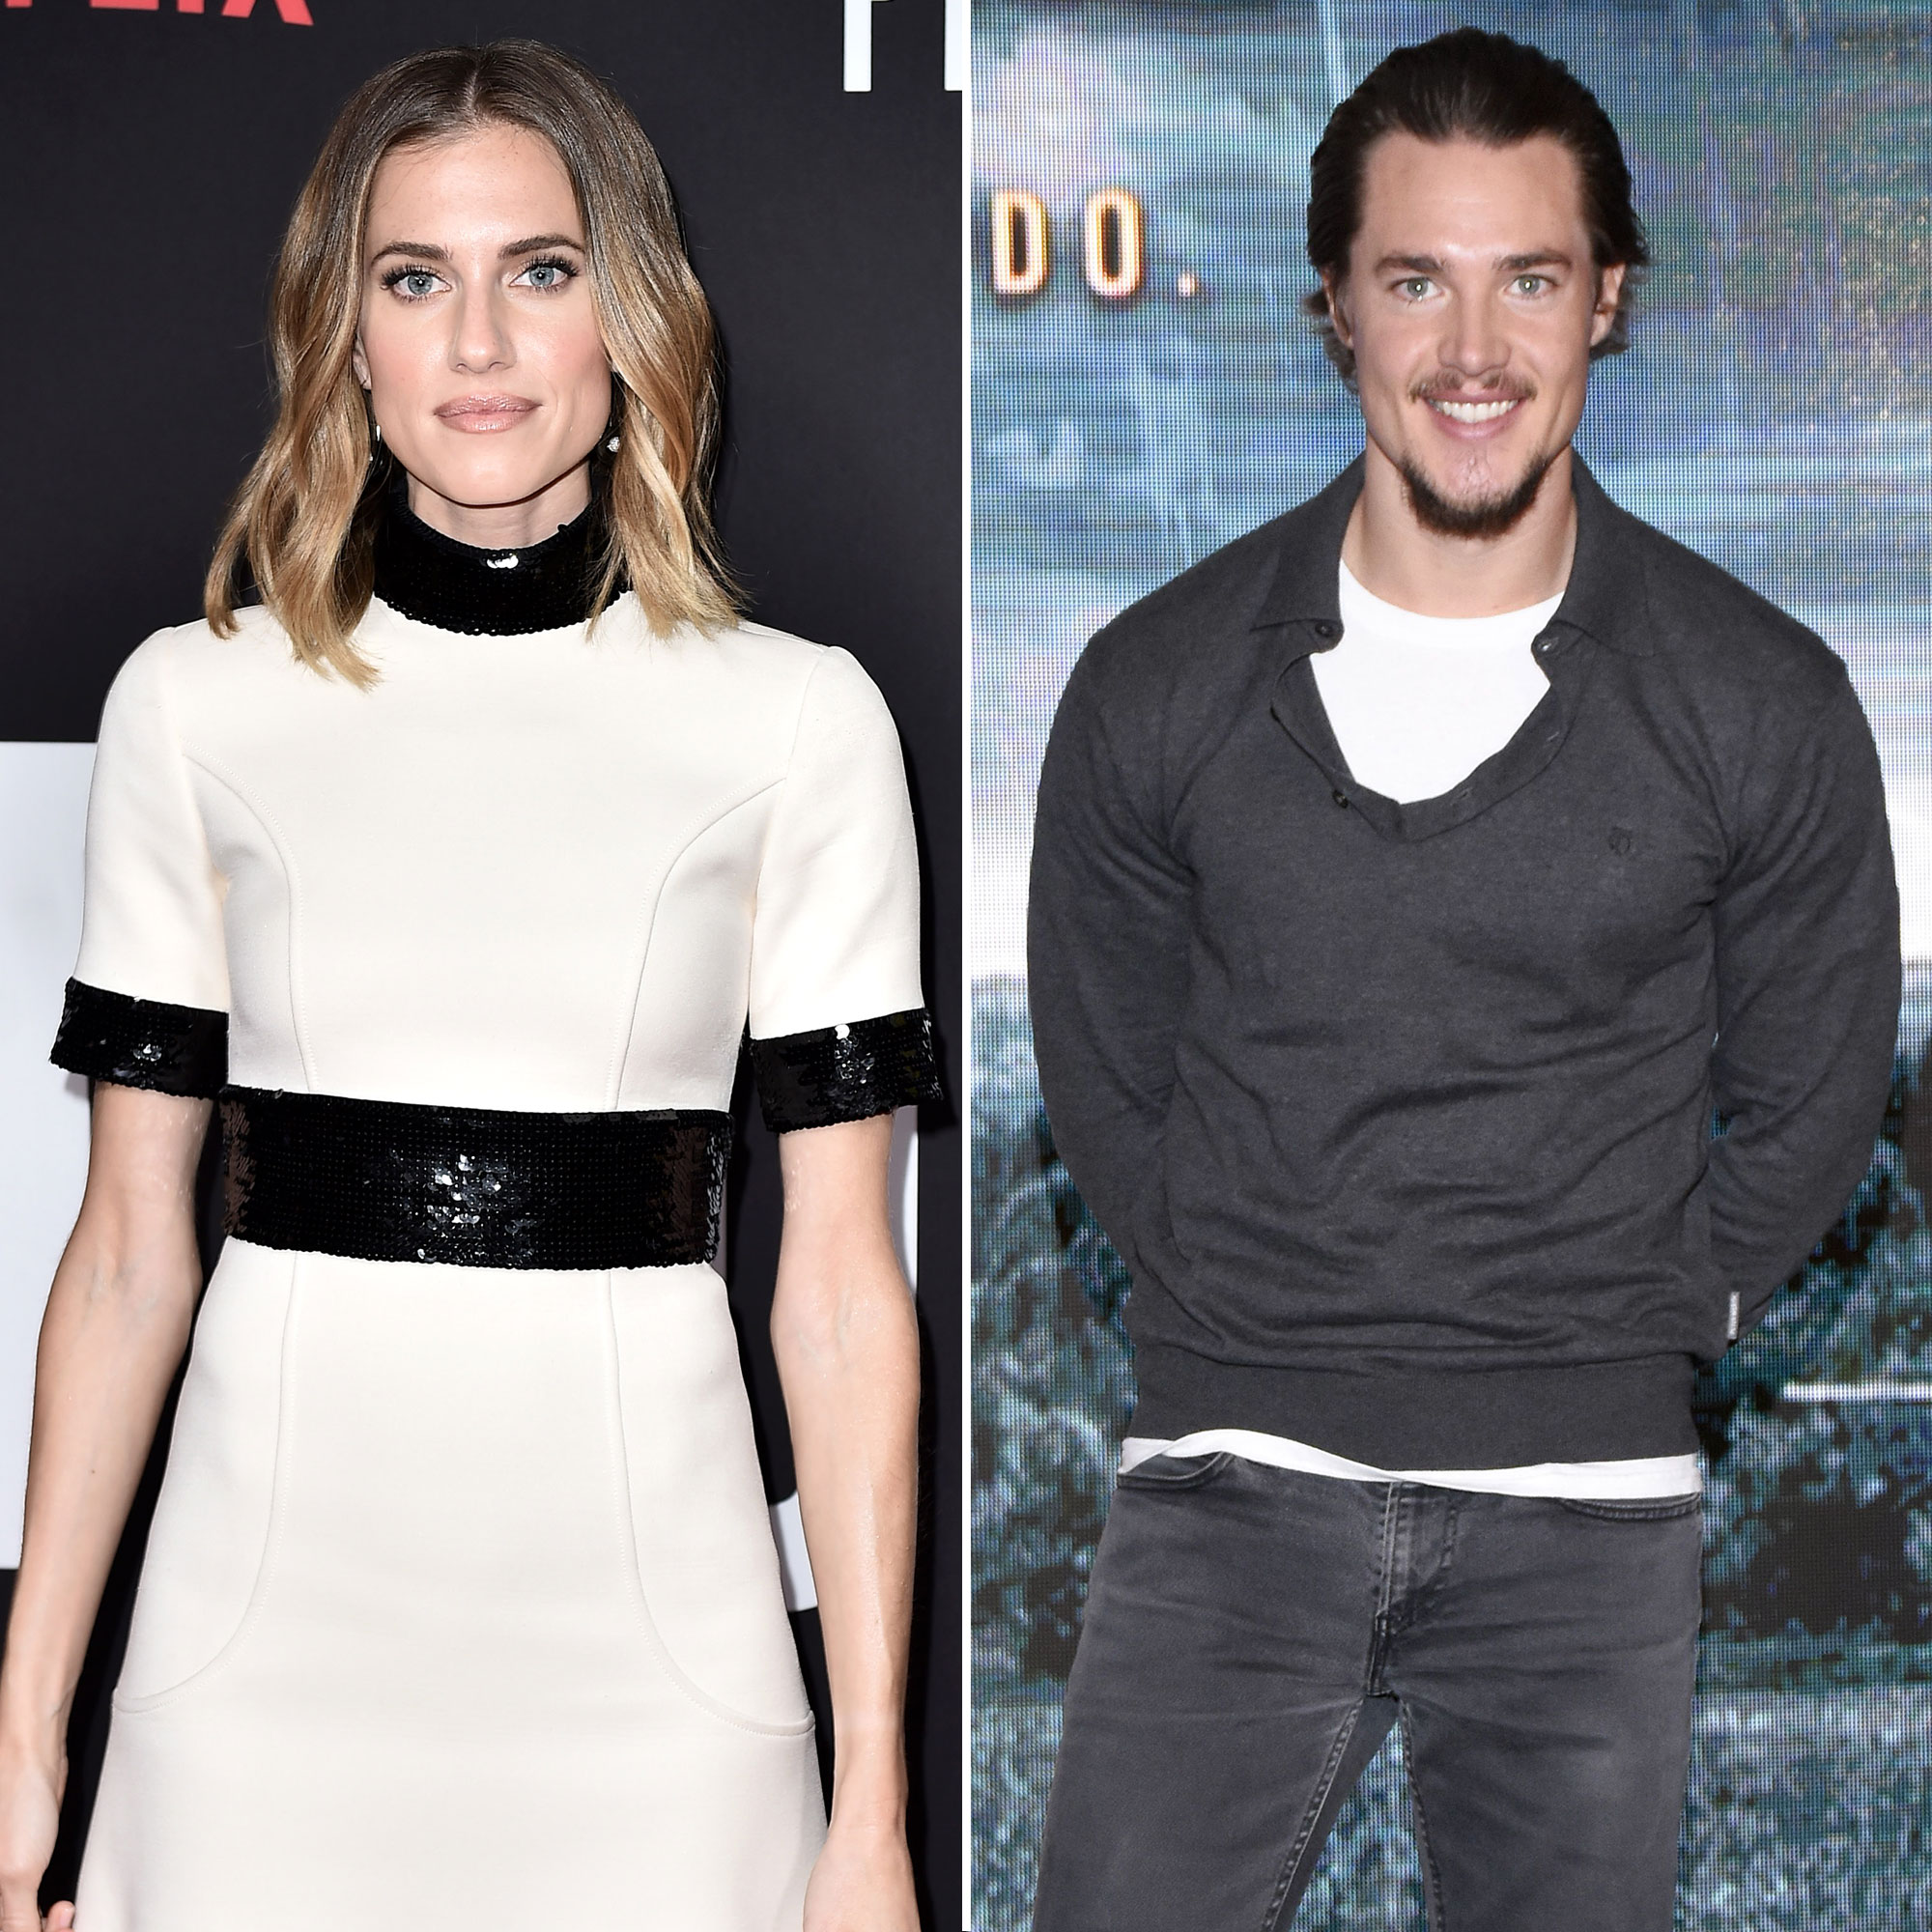 Allison Williams and Alexander Dreymon Quietly Welcomed 1st Child Amid Low-Key Romance